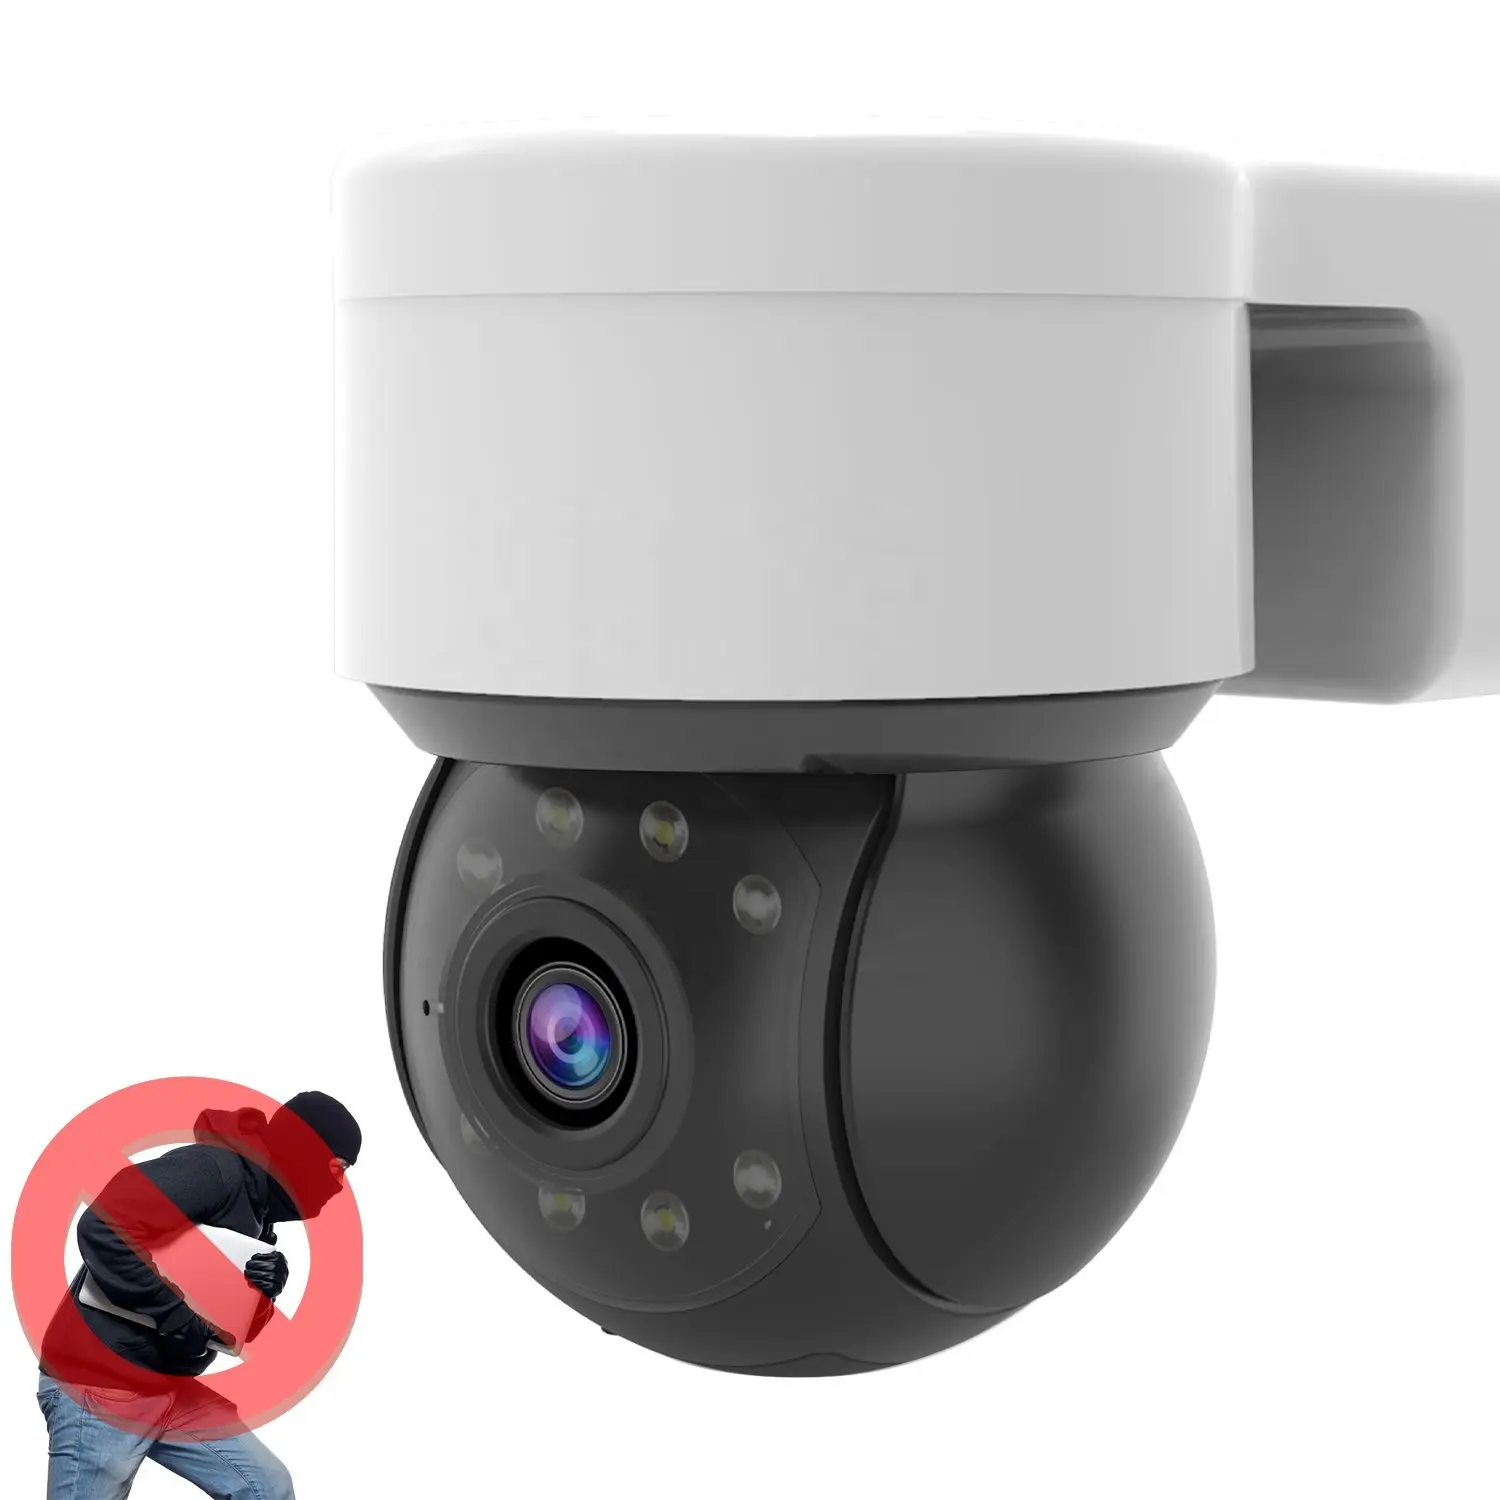 Tuya WiFi Outdoor Wireless Security CCTV IP Camera with Mobile App Control and Motion Tracking